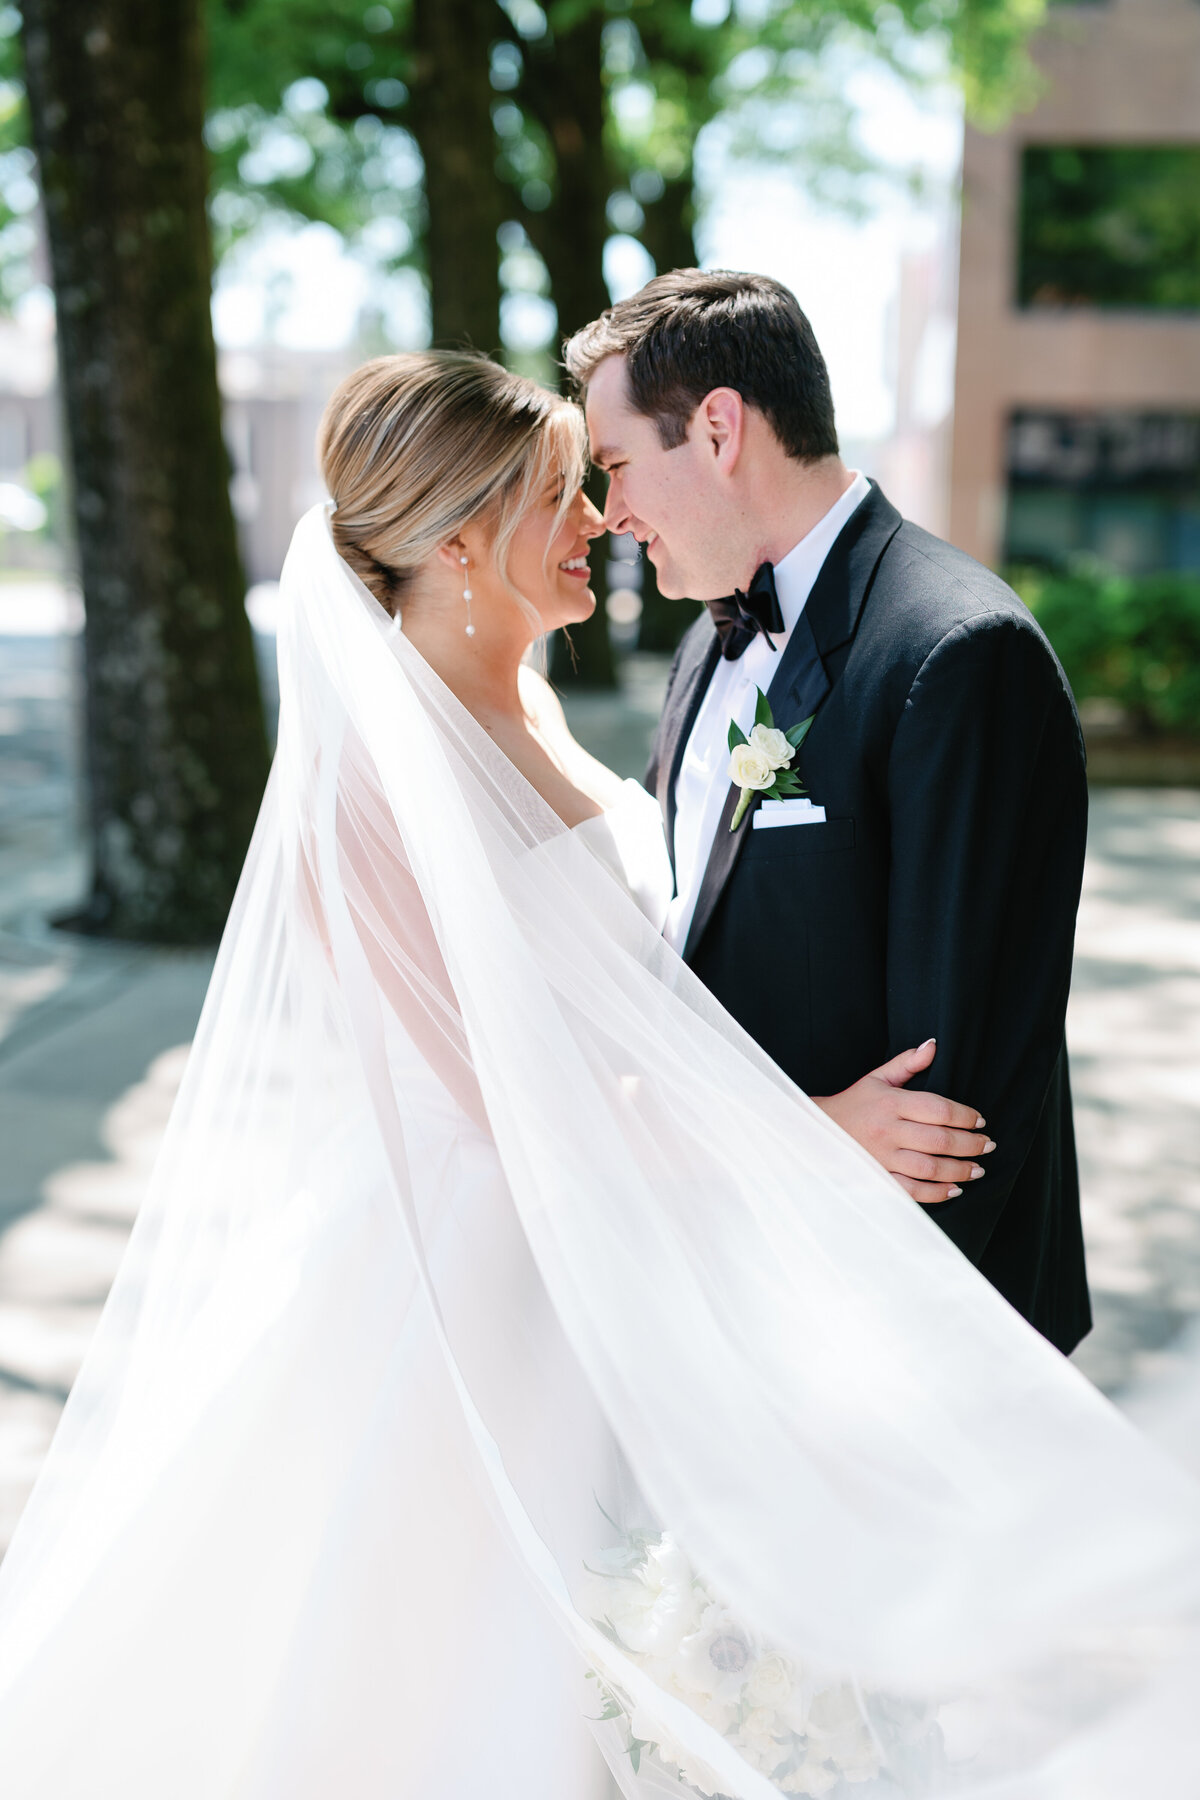 Paige and Tommy Wedding - Bride and Groom Portraits - The Press Room and St. Johns Cathedral - East Tennessee and Destination Wedding Photographer - Alaina René Photography-181